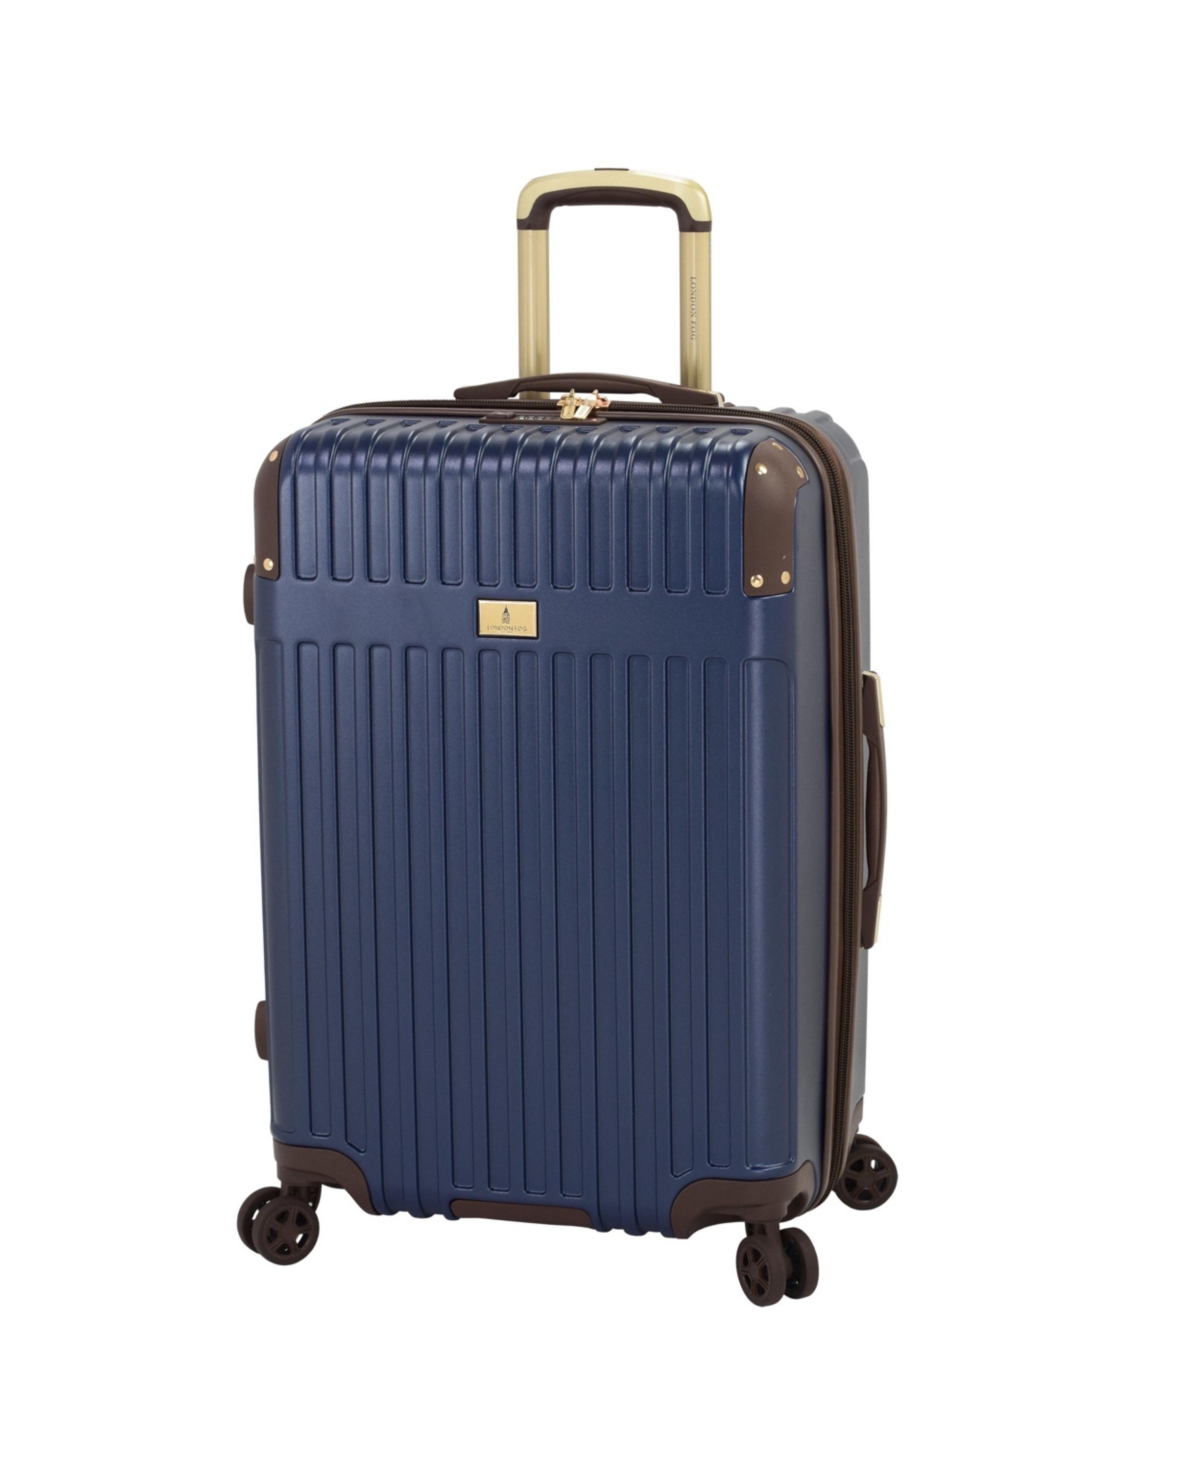 Brentwood Iii 25" Expandable Spinner Hardside, Created for Macy's - Navy